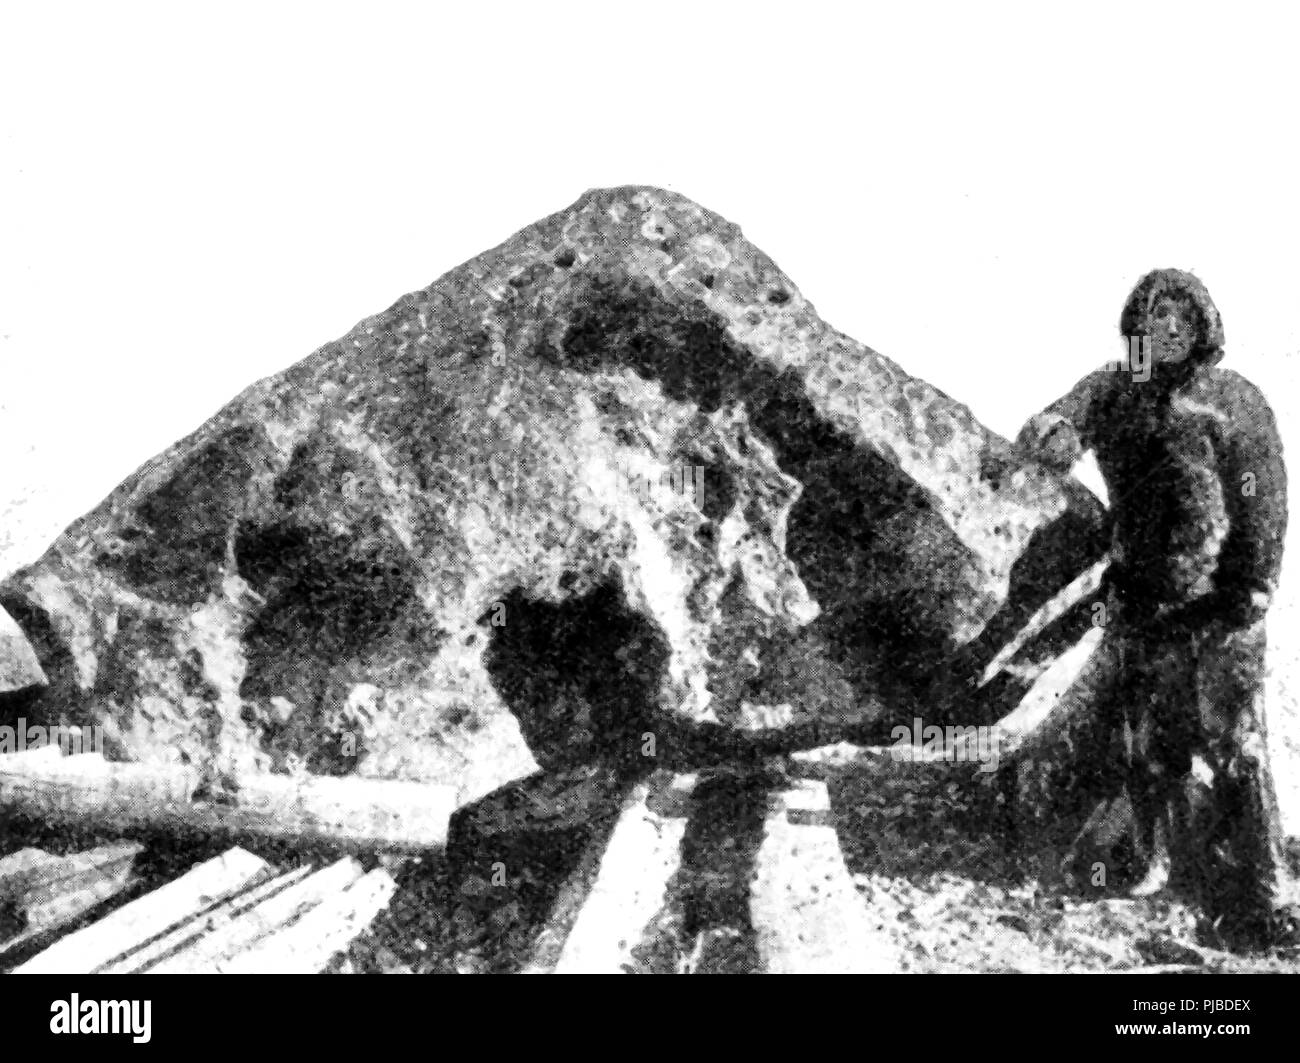 A 1920 news picture showing a giant meteor (The Cape York meteorite)discovered by Commander Peary in Greenland.- Better known as Rear Admiral Robert Edwin Peary  the   American explorer and US Navy officer who claimed to have reached the geographic North Pole with his expedition on April 6, 1909. Stock Photo